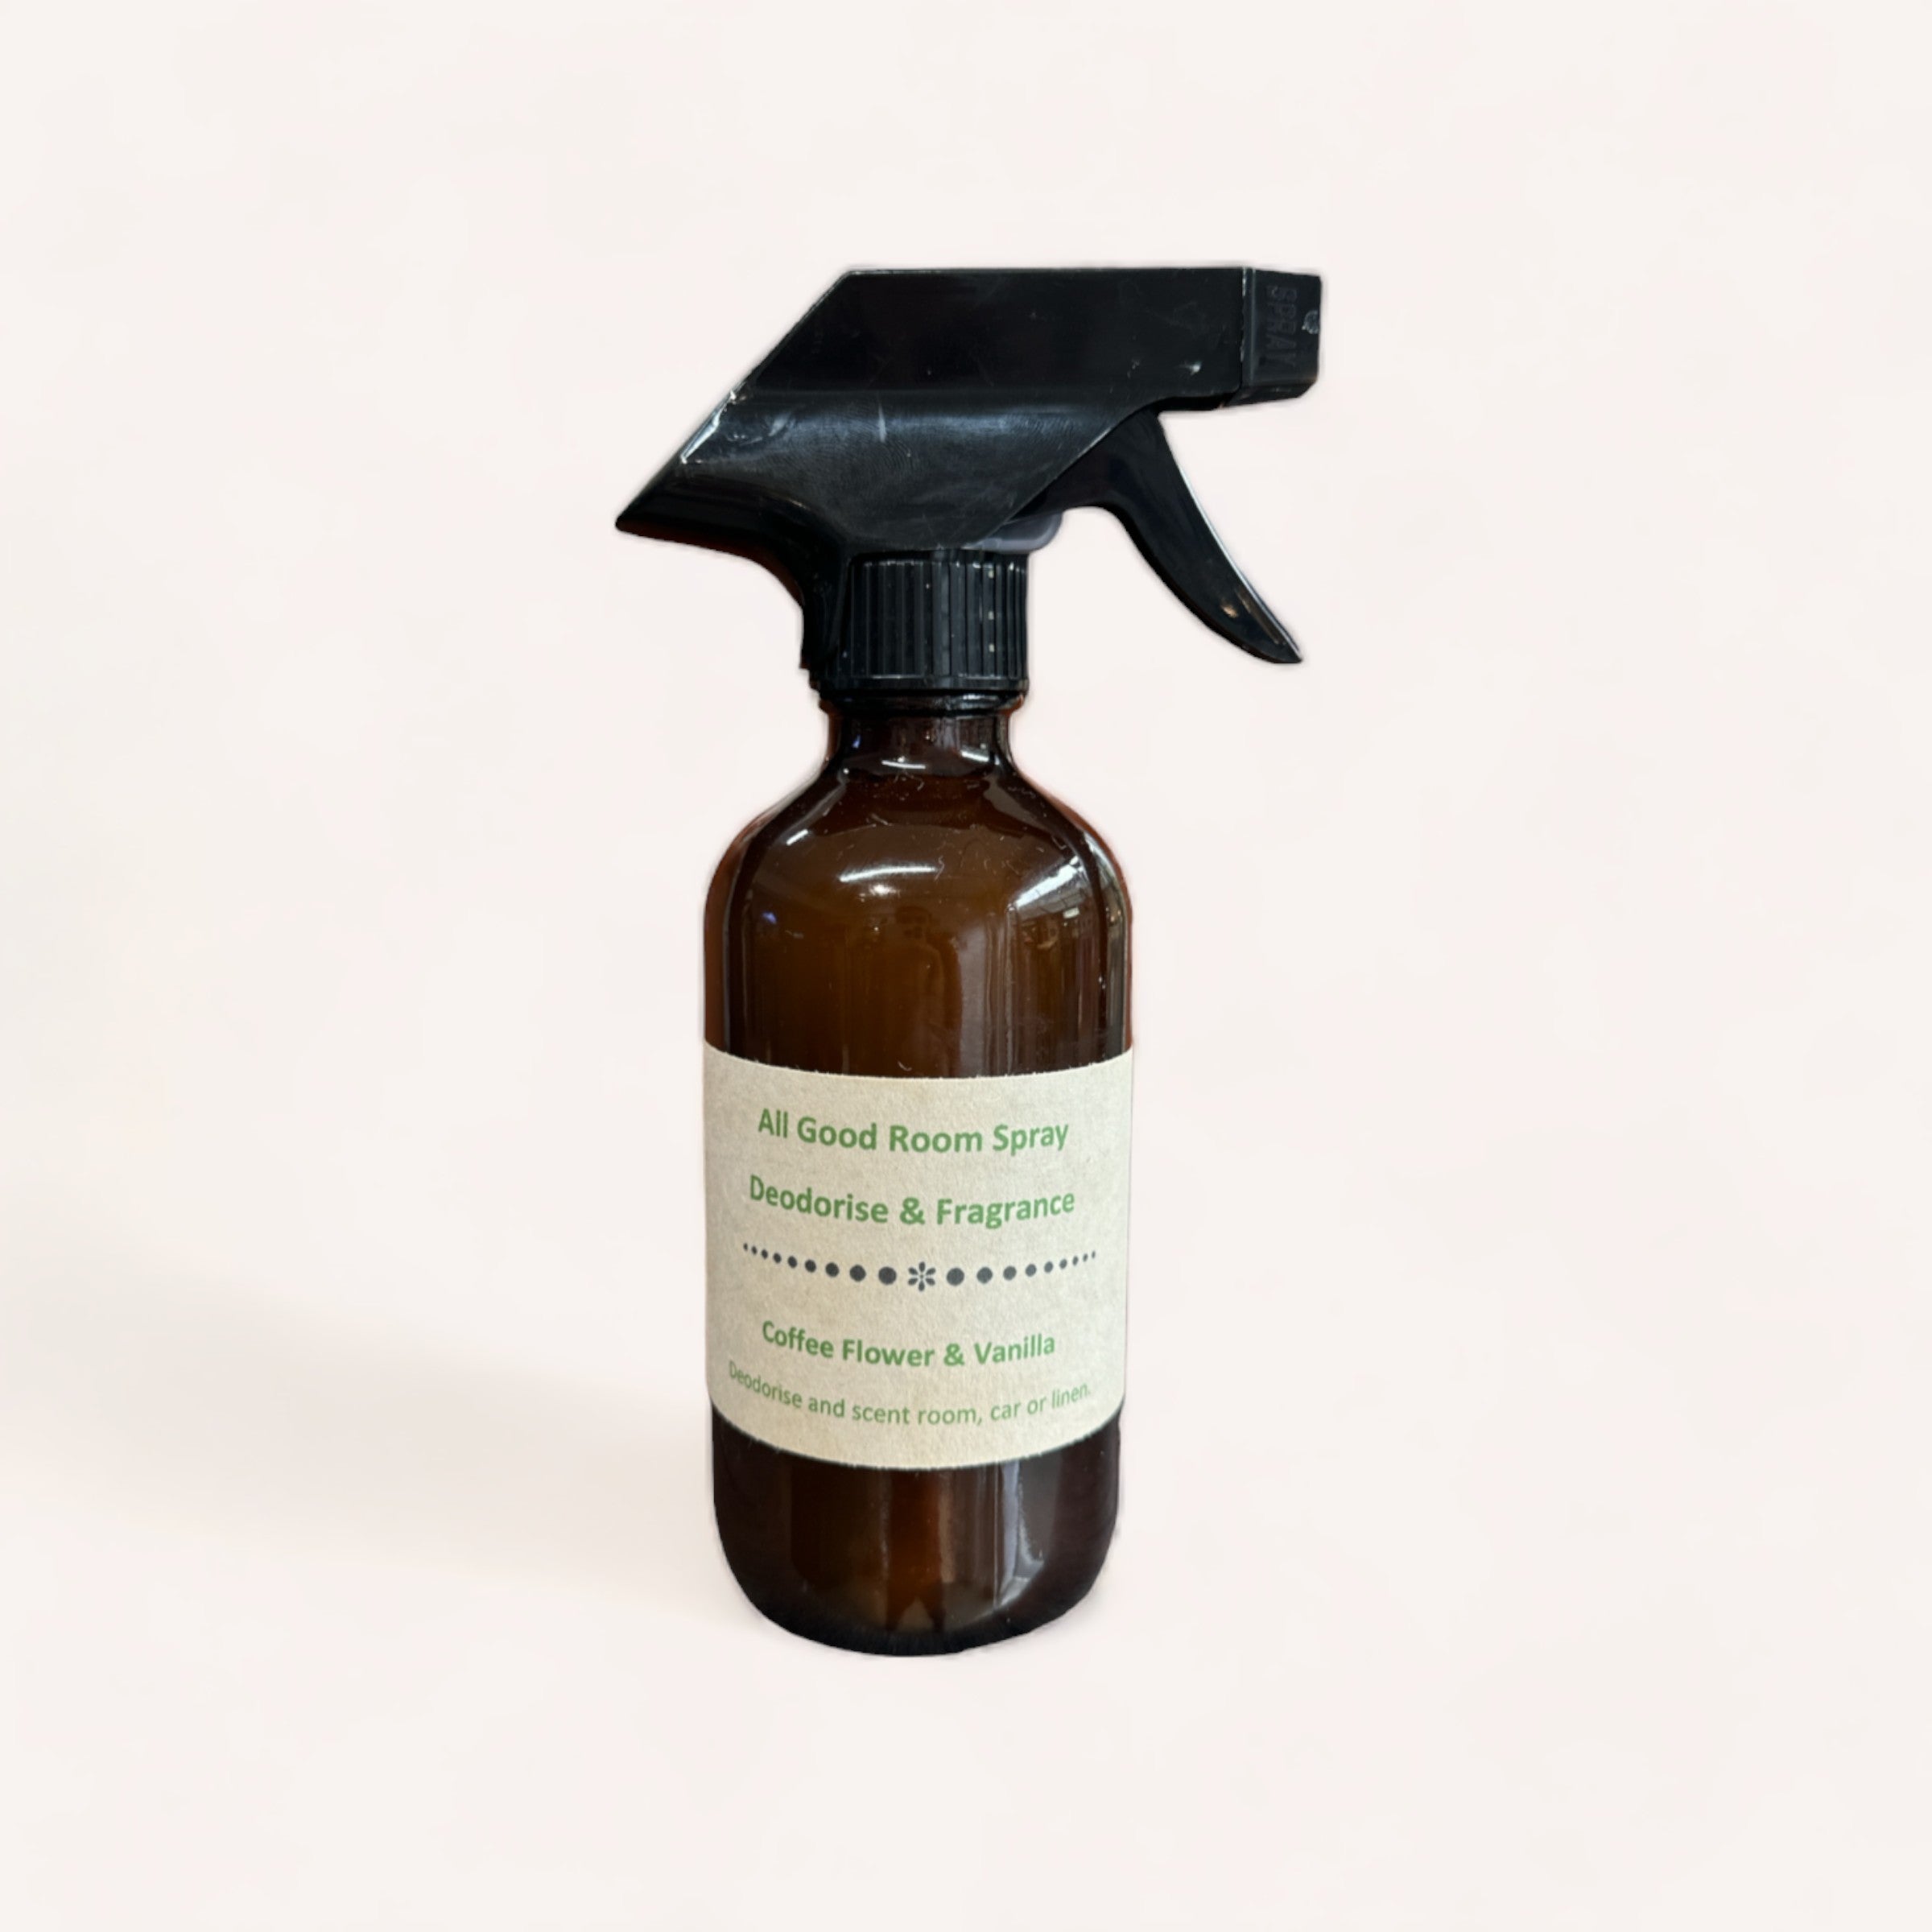 A brown glass spray bottle with a black trigger nozzle labeled "Coffee Flower & Vanilla Room Spray by All Good Bags, deodorizing freshener, for home and recent room, or car." against a plain.